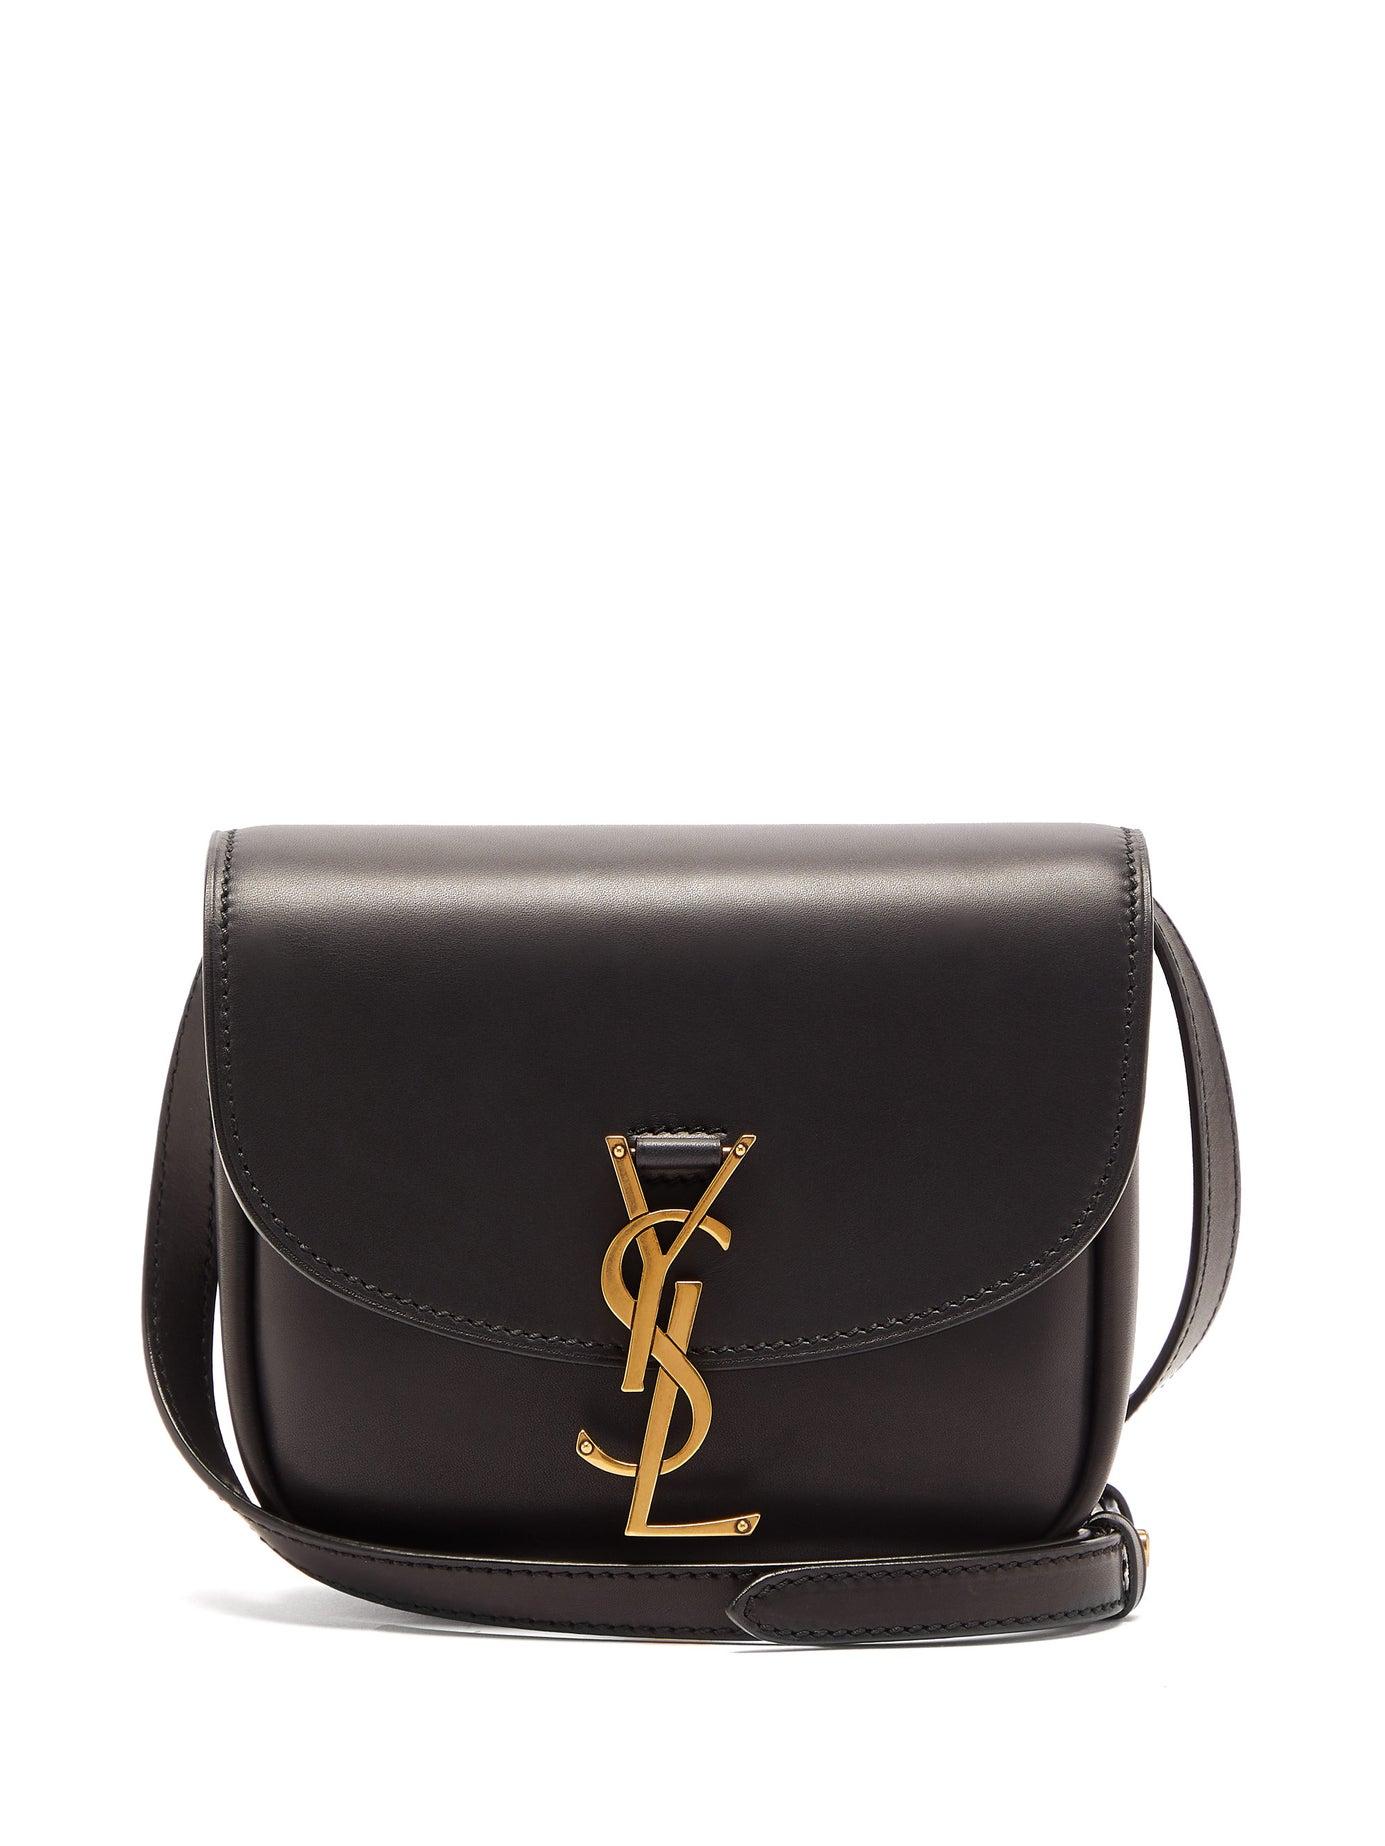 Saint Laurent Kaia Small Satchel In Shiny Crocodile-embossed Leather in Black Womens Bags Satchel bags and purses 